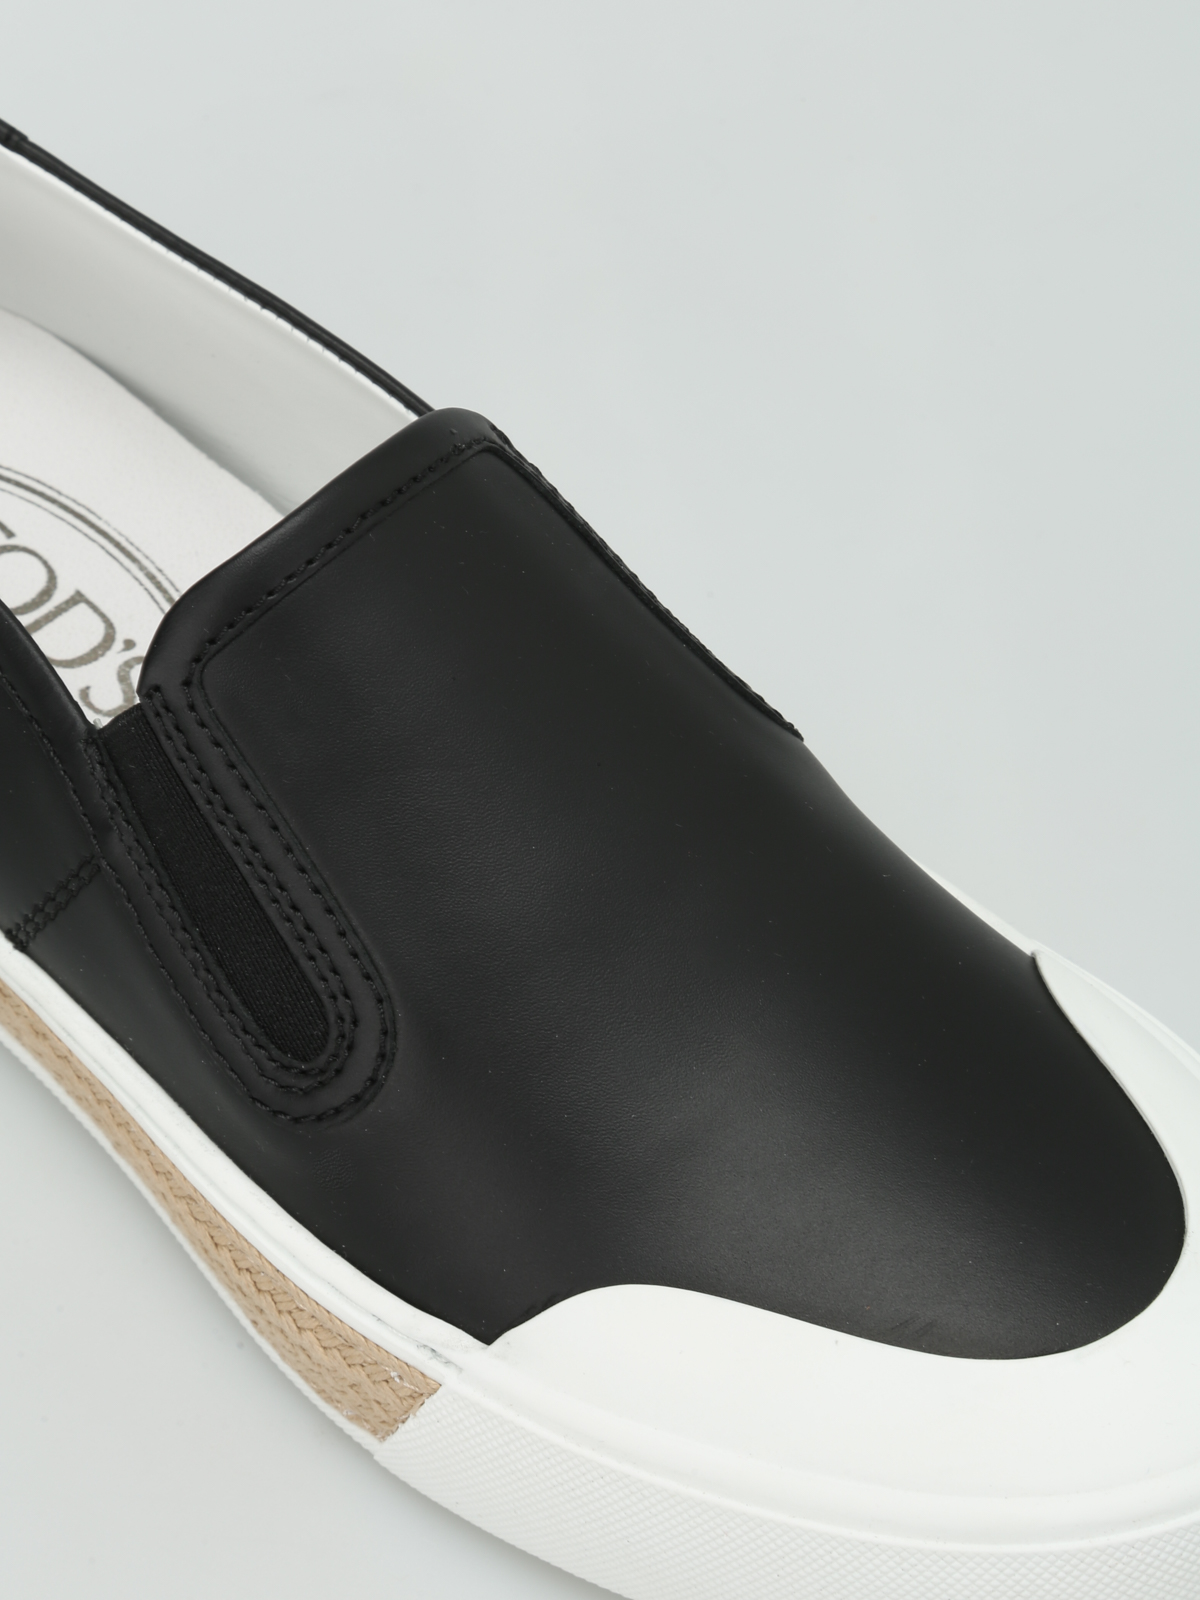 leather slip on loafers